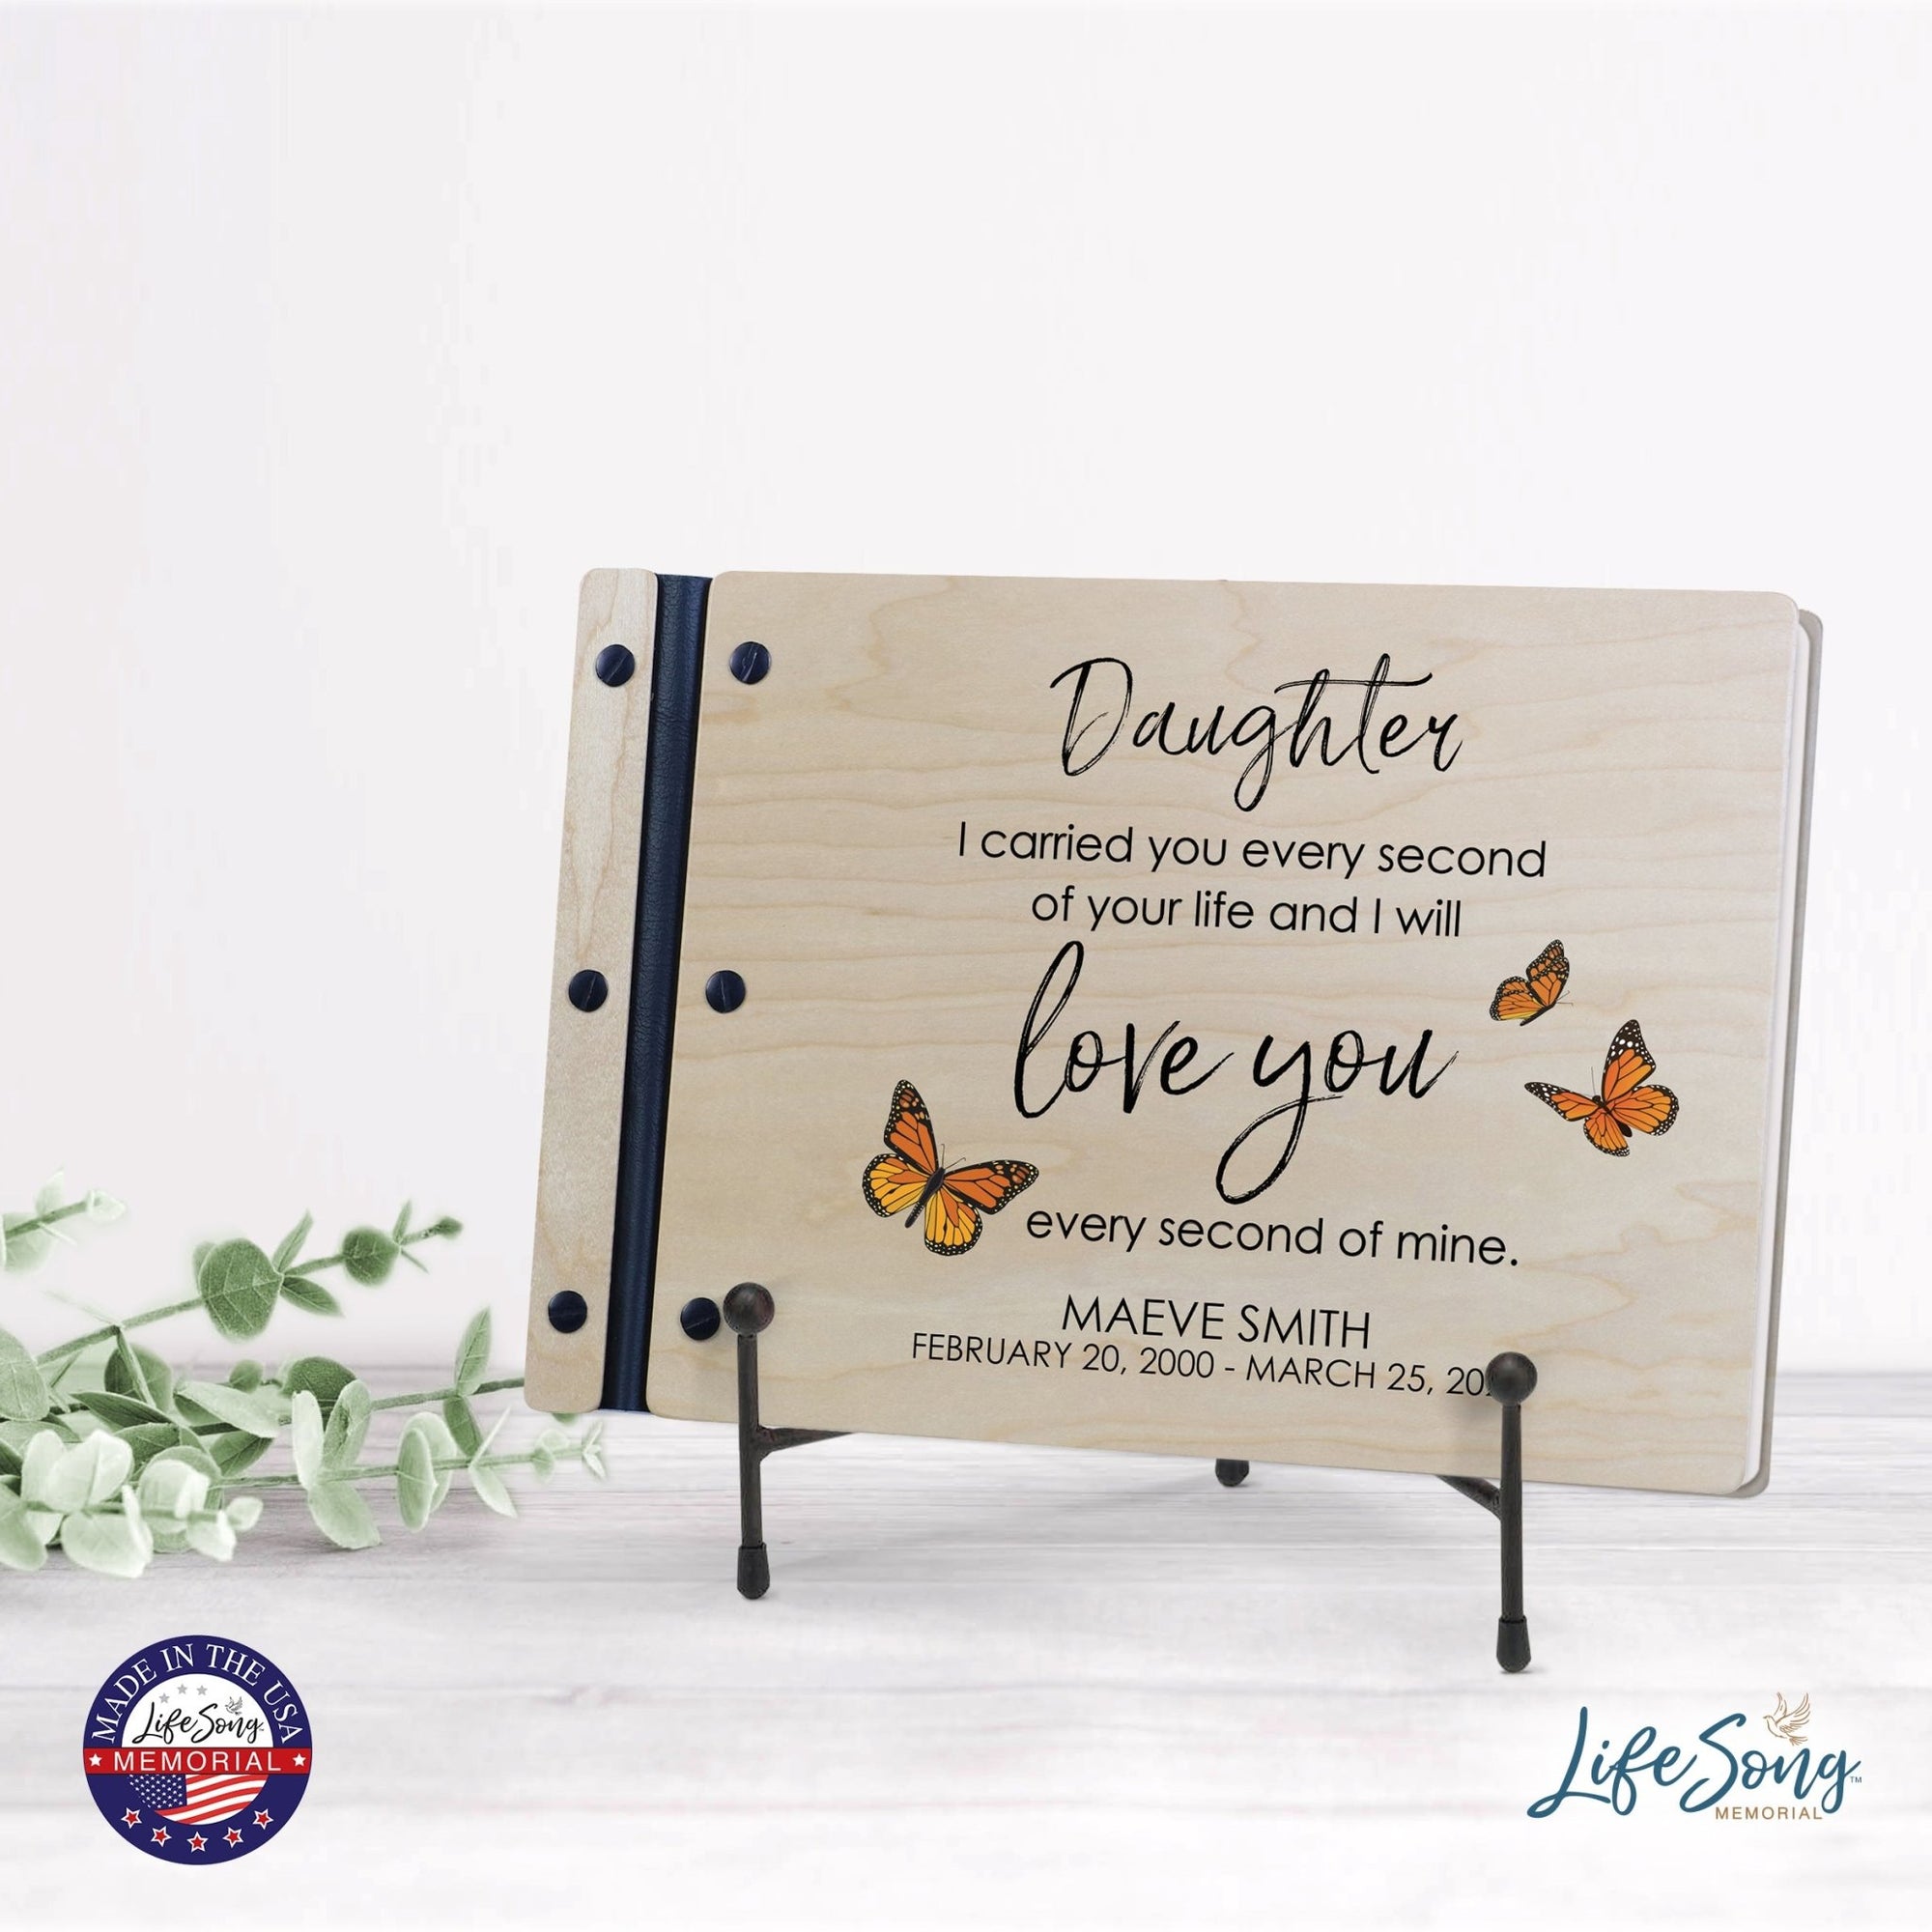 Personalized Medium Wooden Memorial Guestbook 12.375x8.5 - I Carried You Every Second (Ivory) - LifeSong Milestones